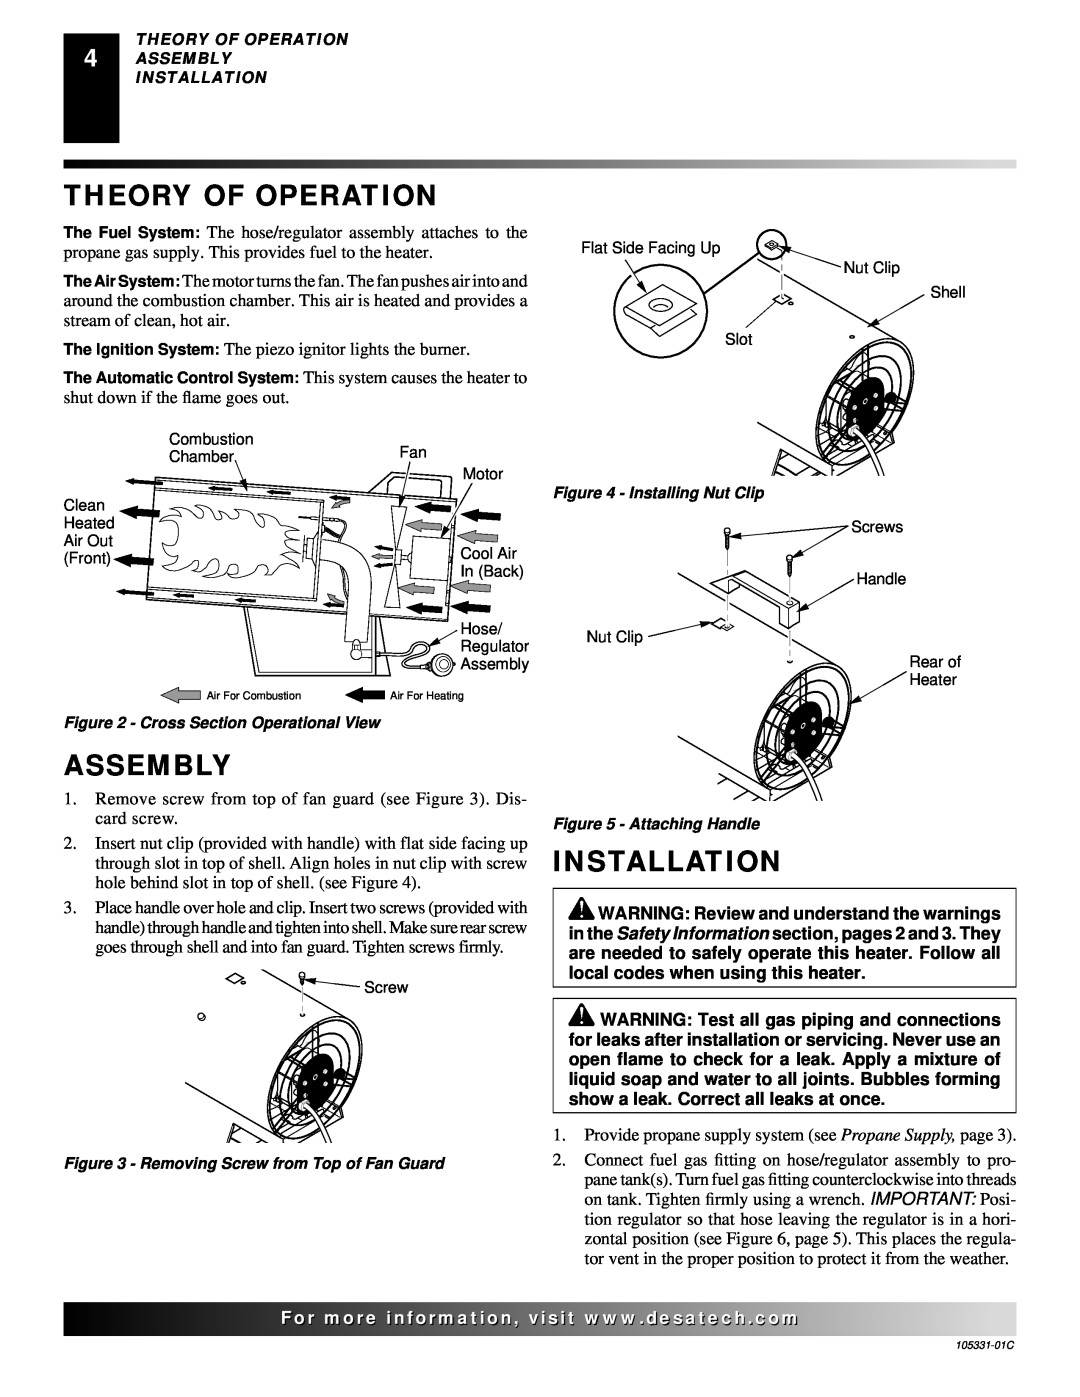 Desa ROPANE CONSTRUCTION HEATER Theory Of Operation Assembly Installation, Cross Section Operational View 